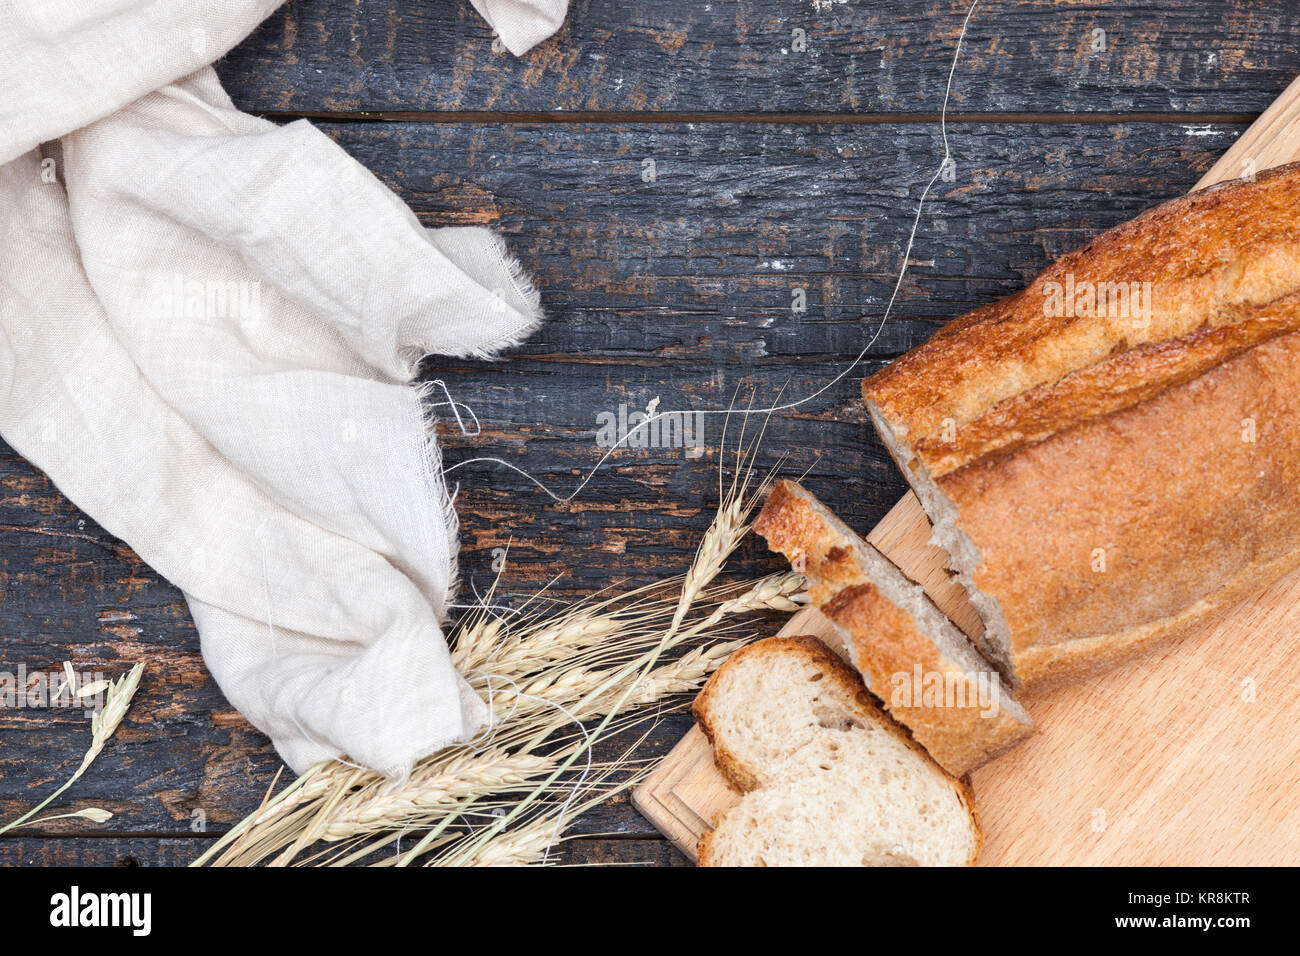 Rustic bread on wood table. Dark woody background with free text space. Stock Photo